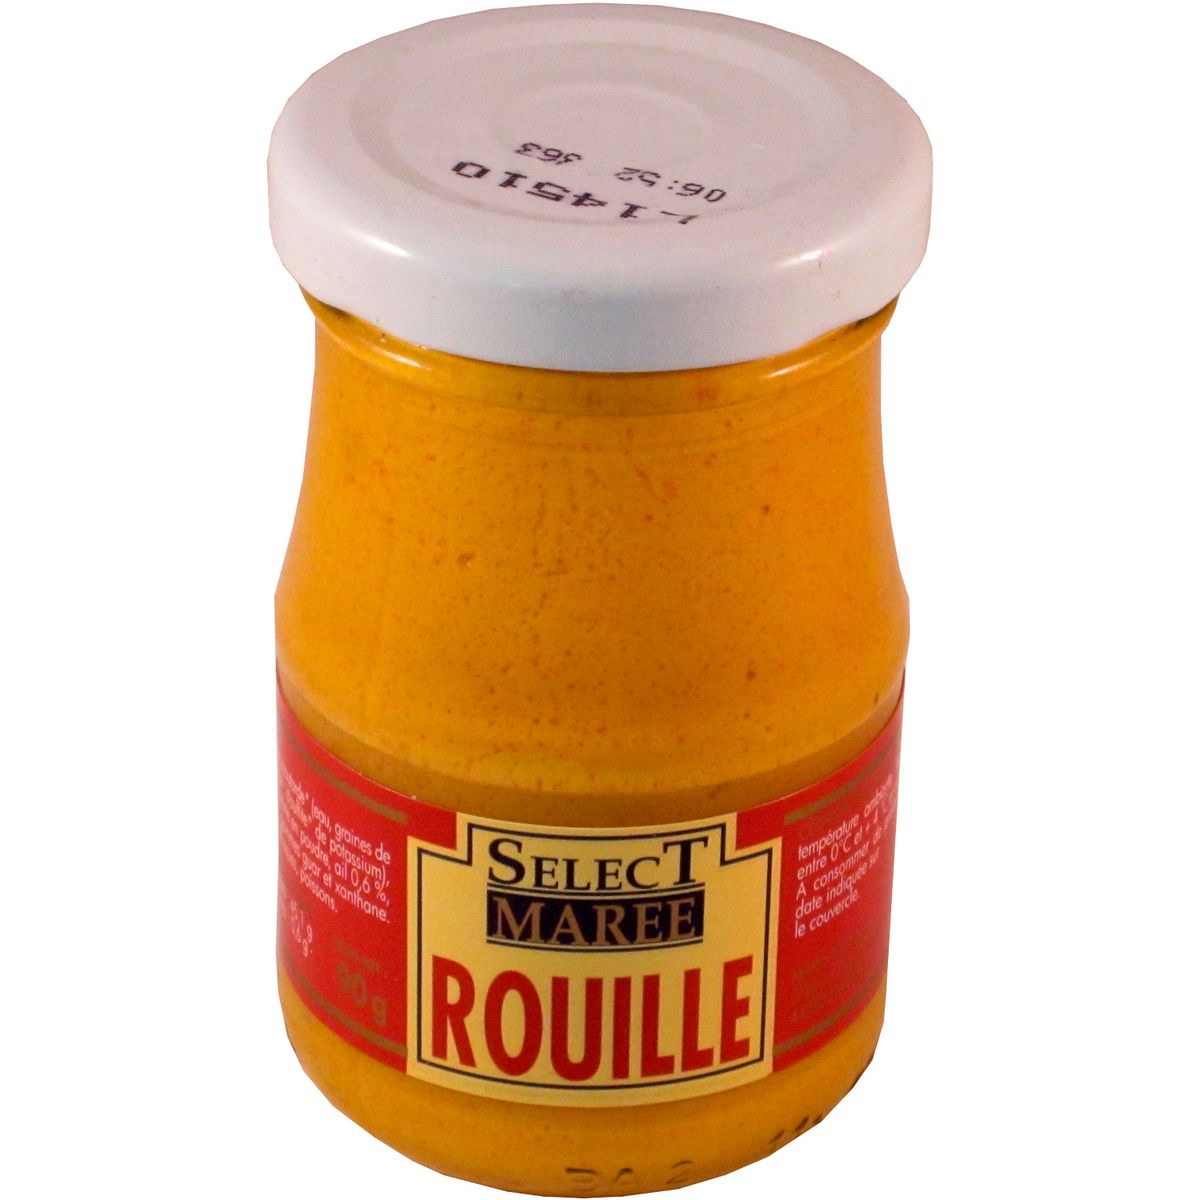 SELECT MAREE Sauce rouille 90g